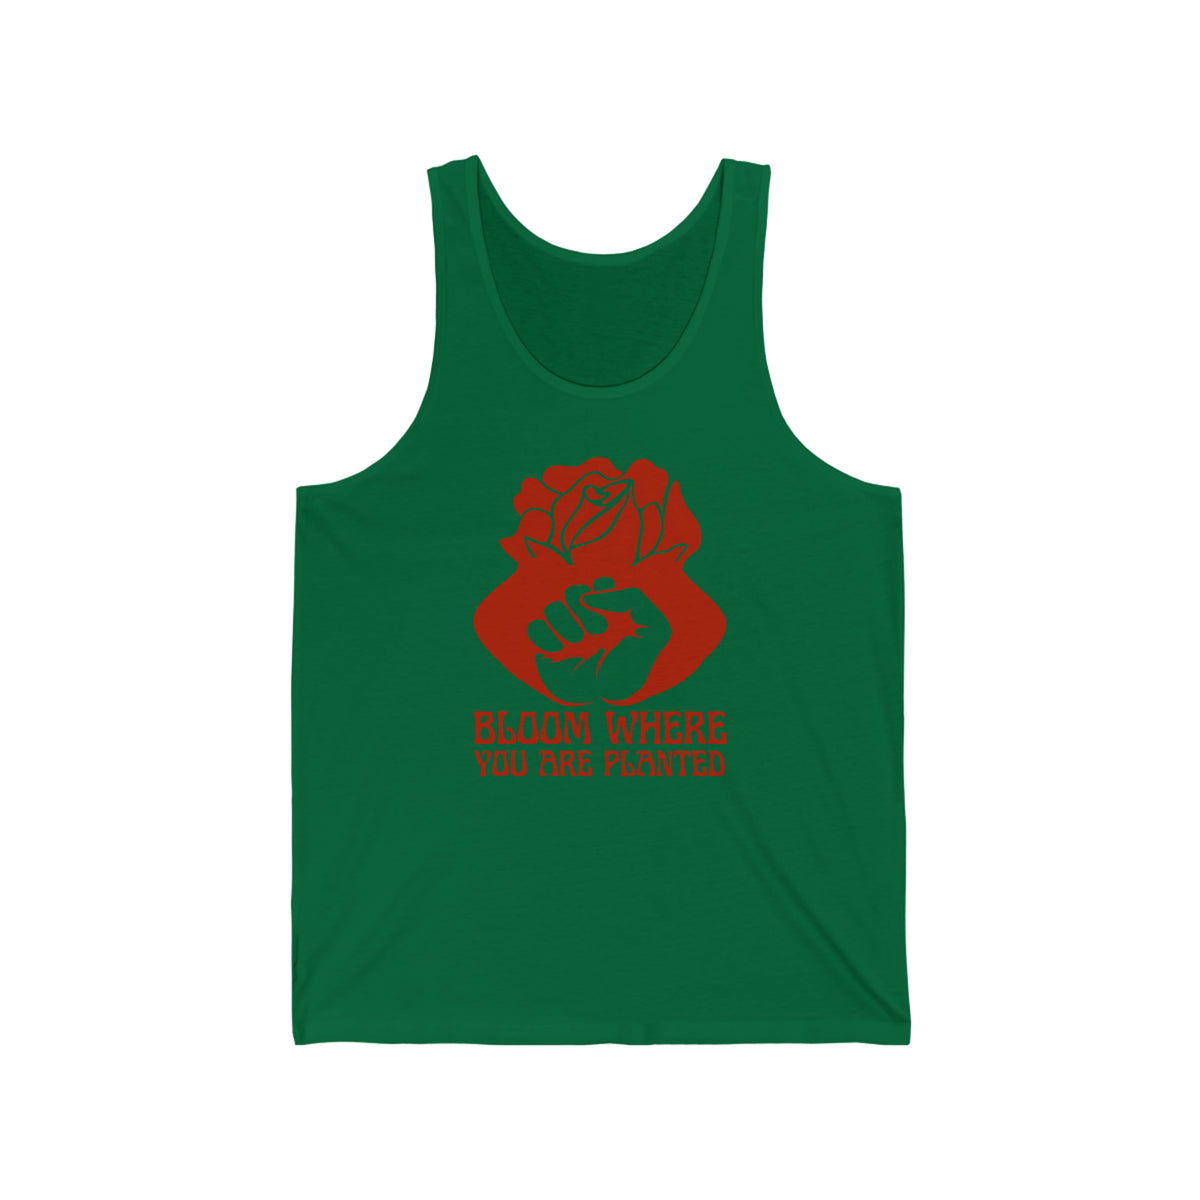 Bloom Where You're Planted Tank - Tank - Twisted Jezebel